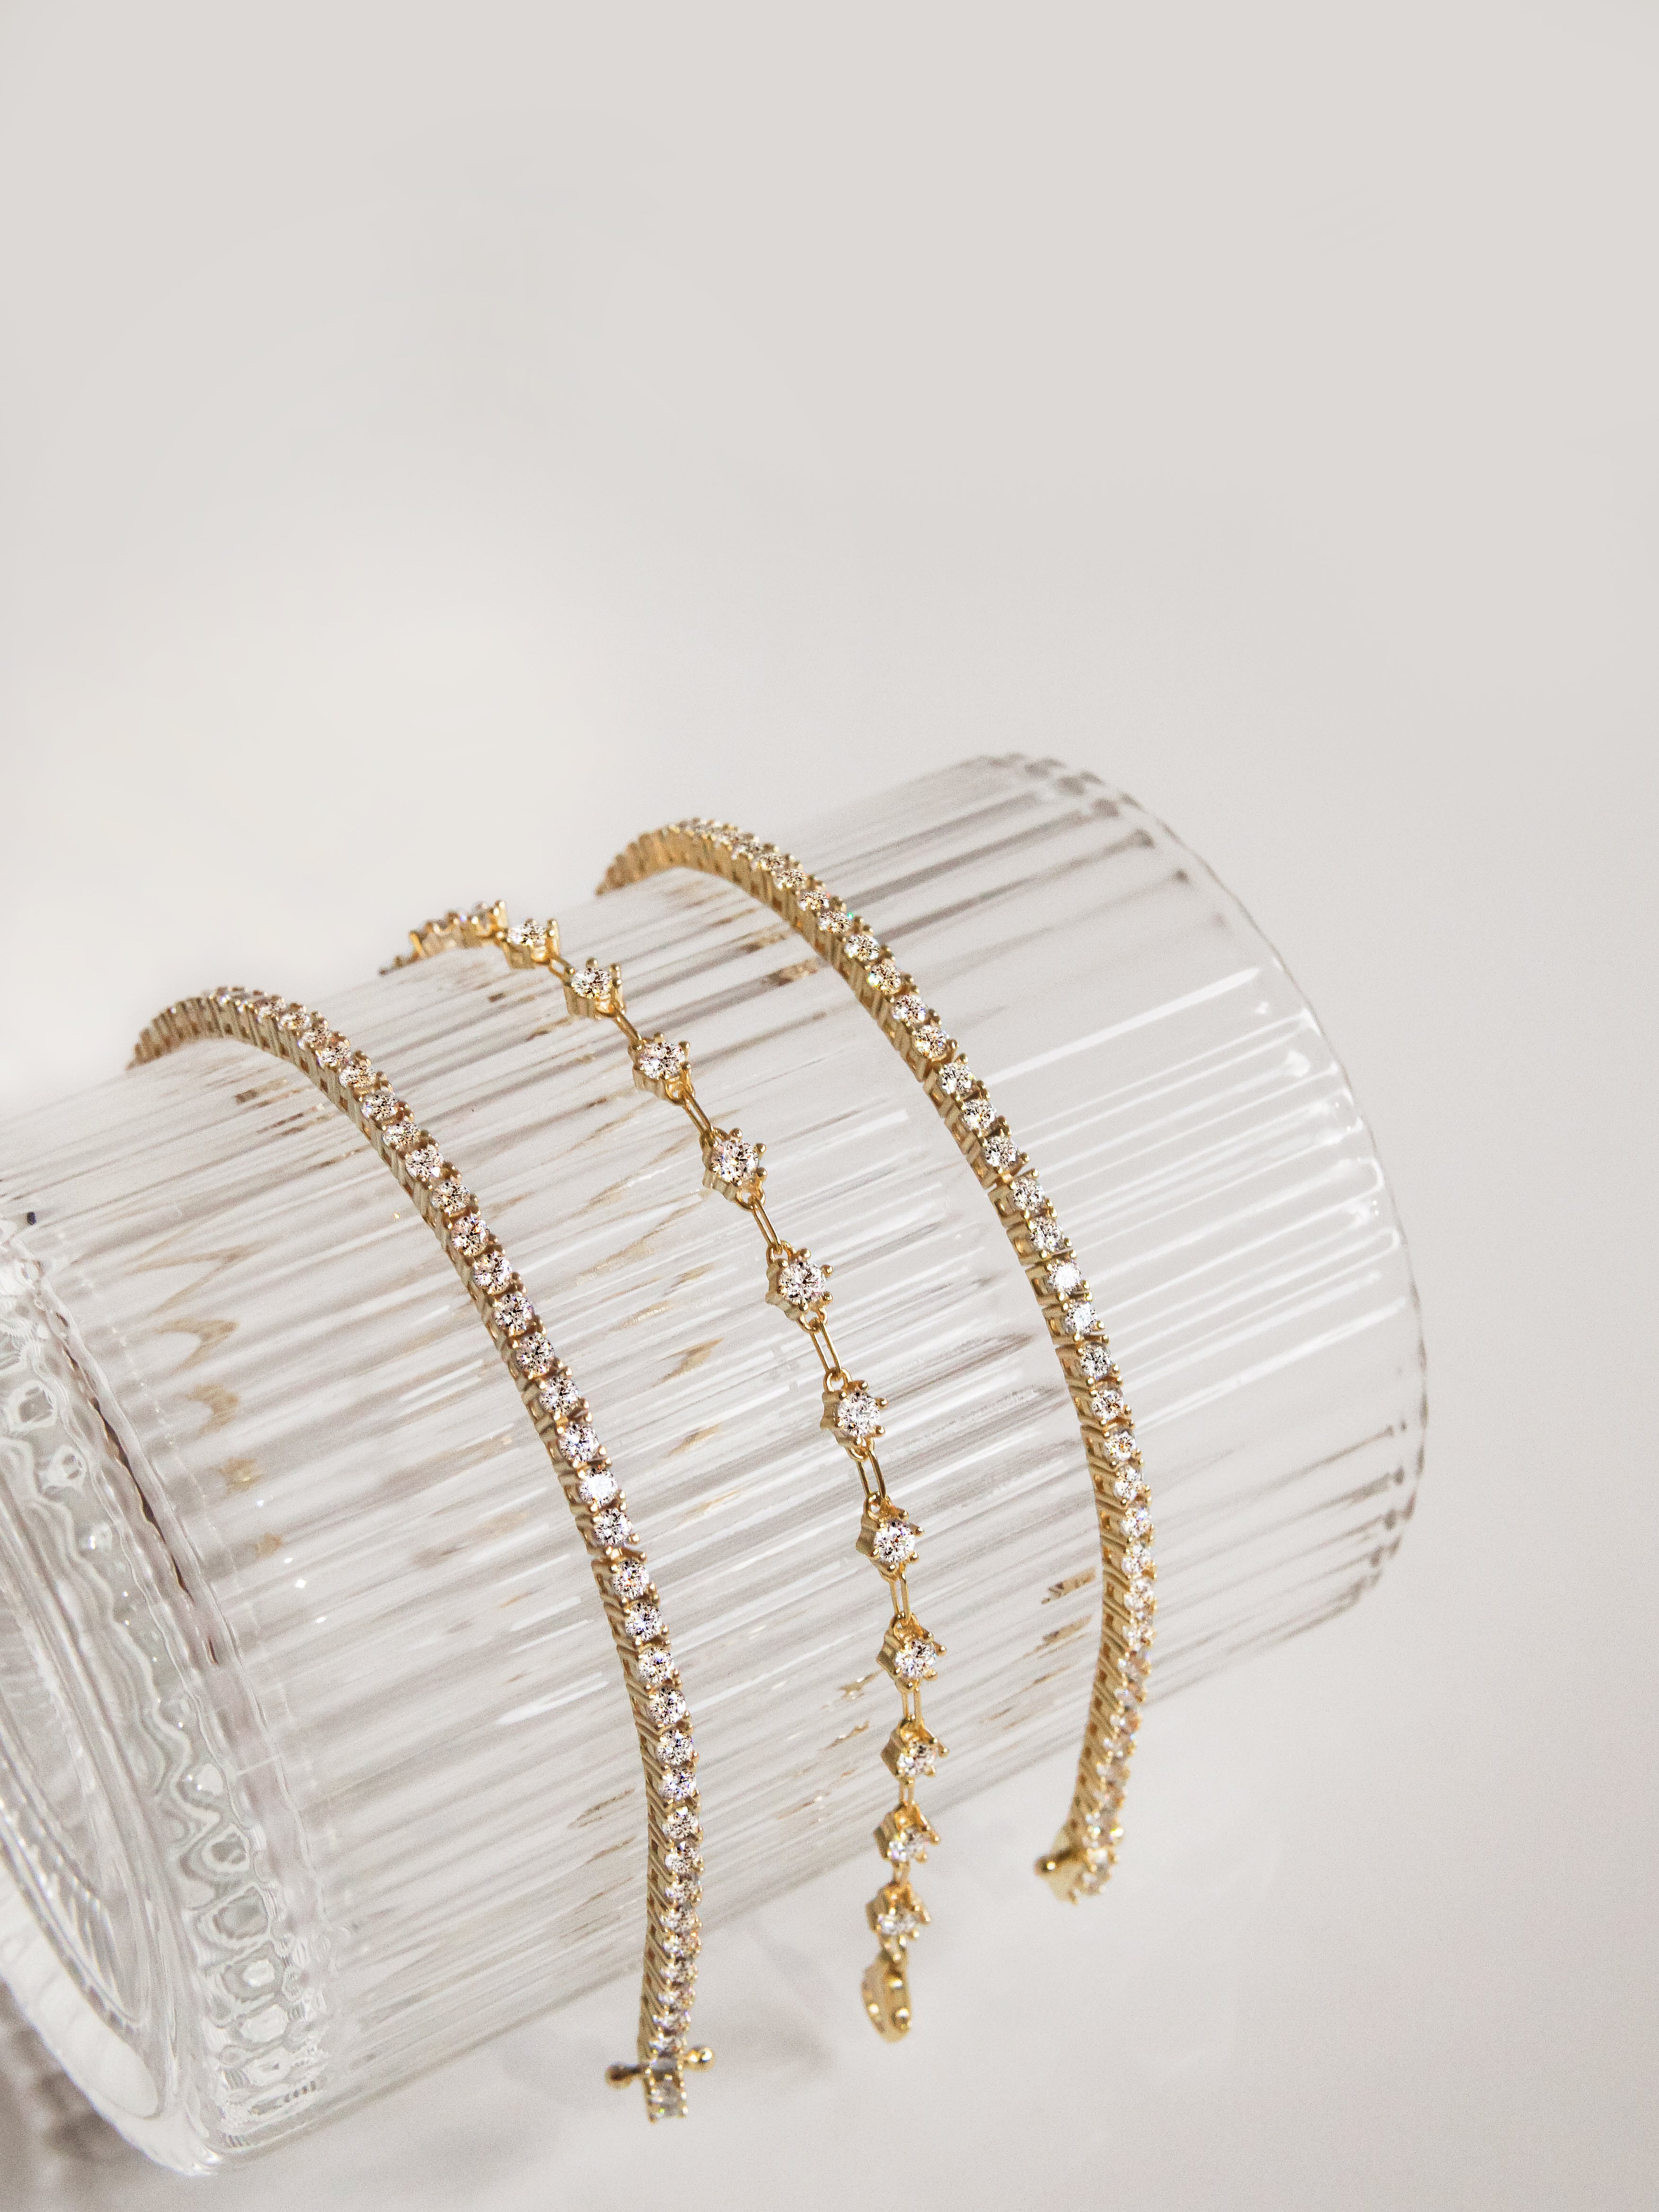 Tender Objects' Lawn Tennis Bracelet - A chic blend of timeless elegance inspired by lush greenery.